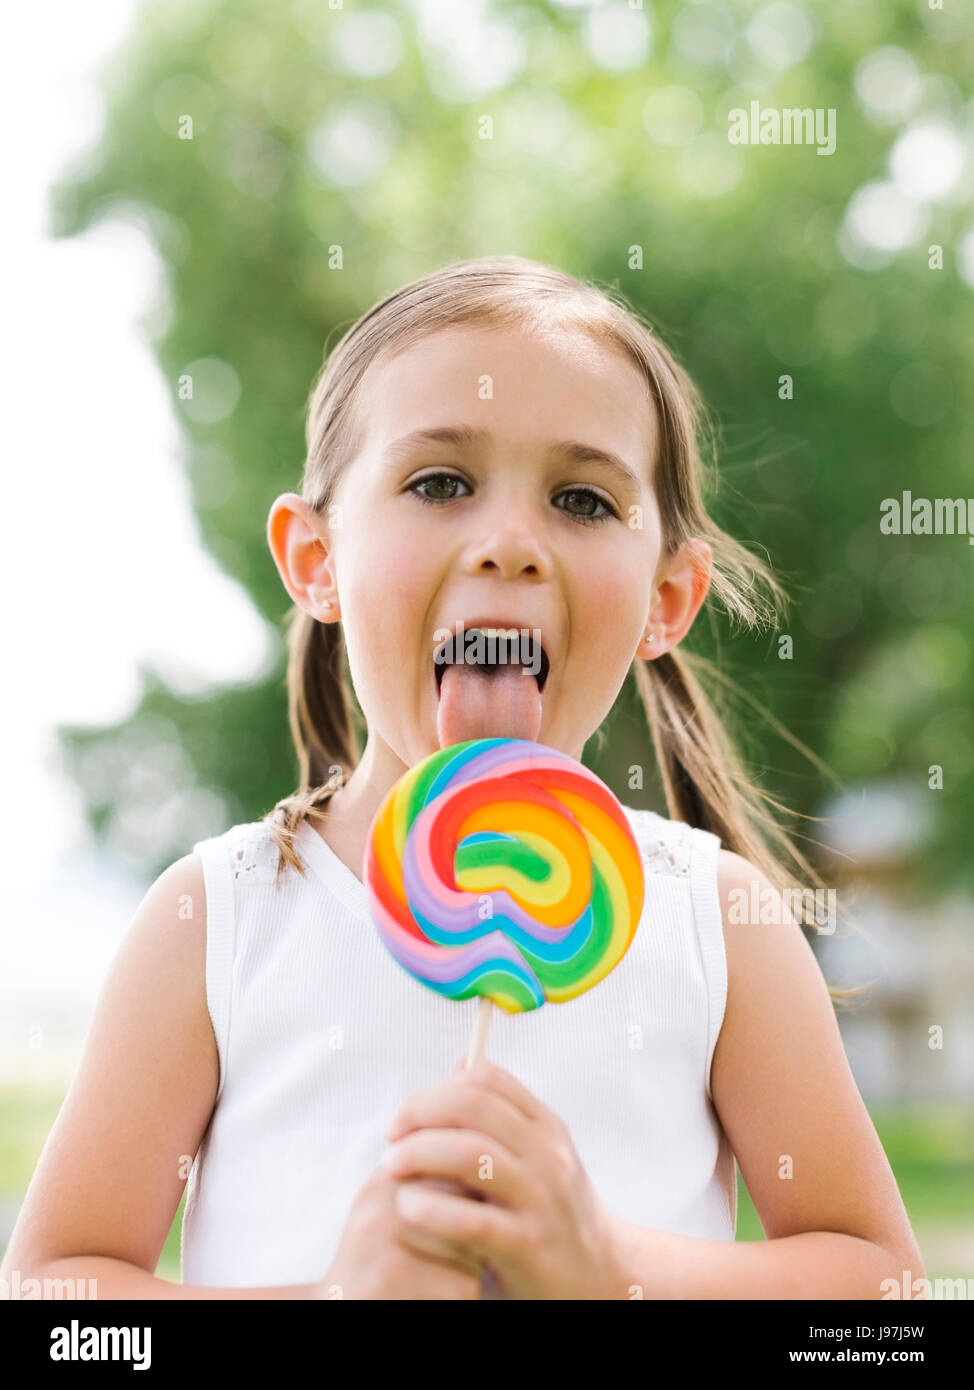 Girl (4-5) licking colorful lollipop Stock Photo